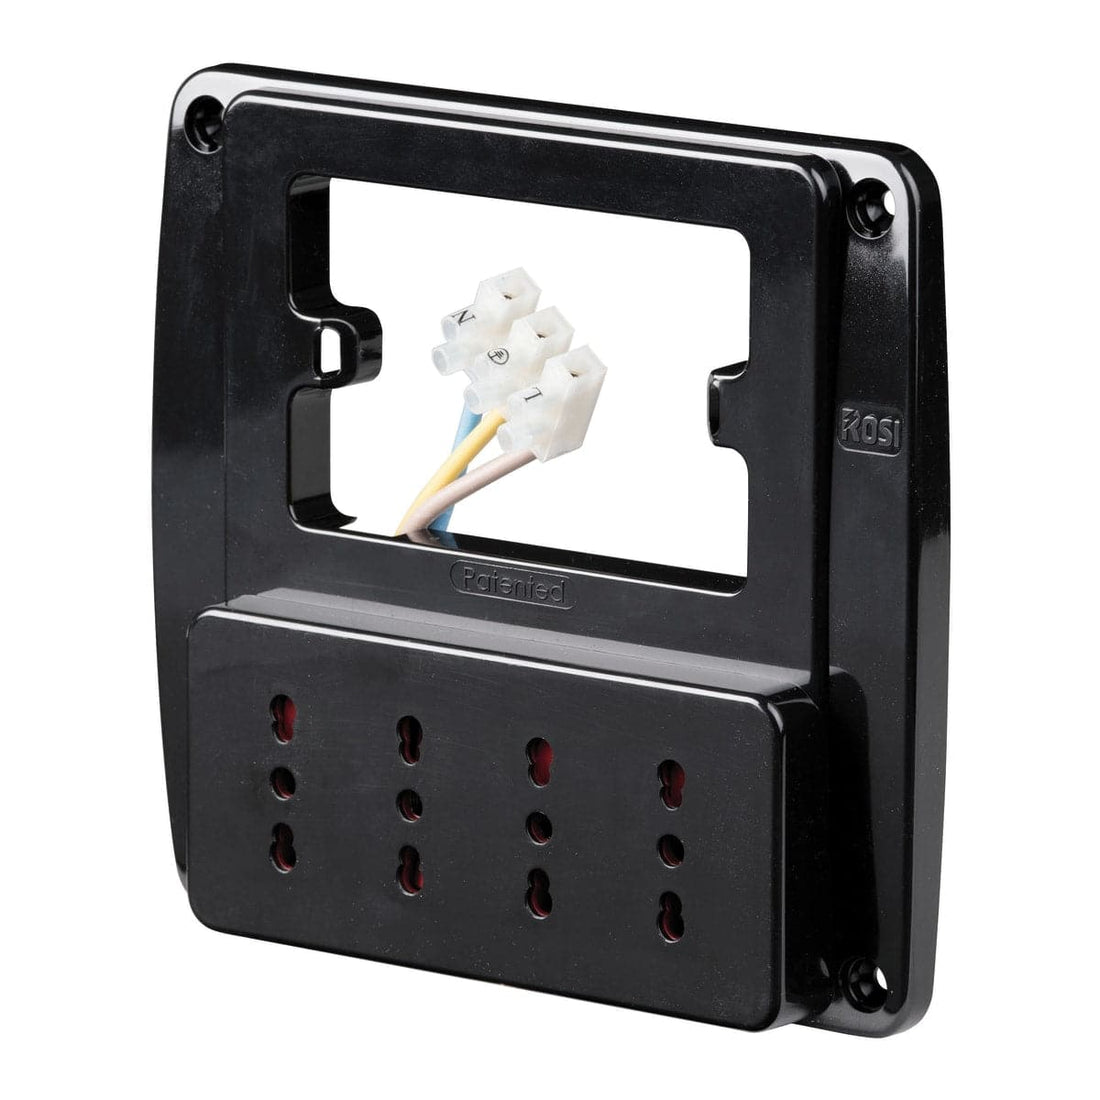 EMILIA SMART WALL SOCKET 4 SOCKETS 10/16A SUITABLE FOR 3-PIN BLACK BOX - best price from Maltashopper.com BR420003805